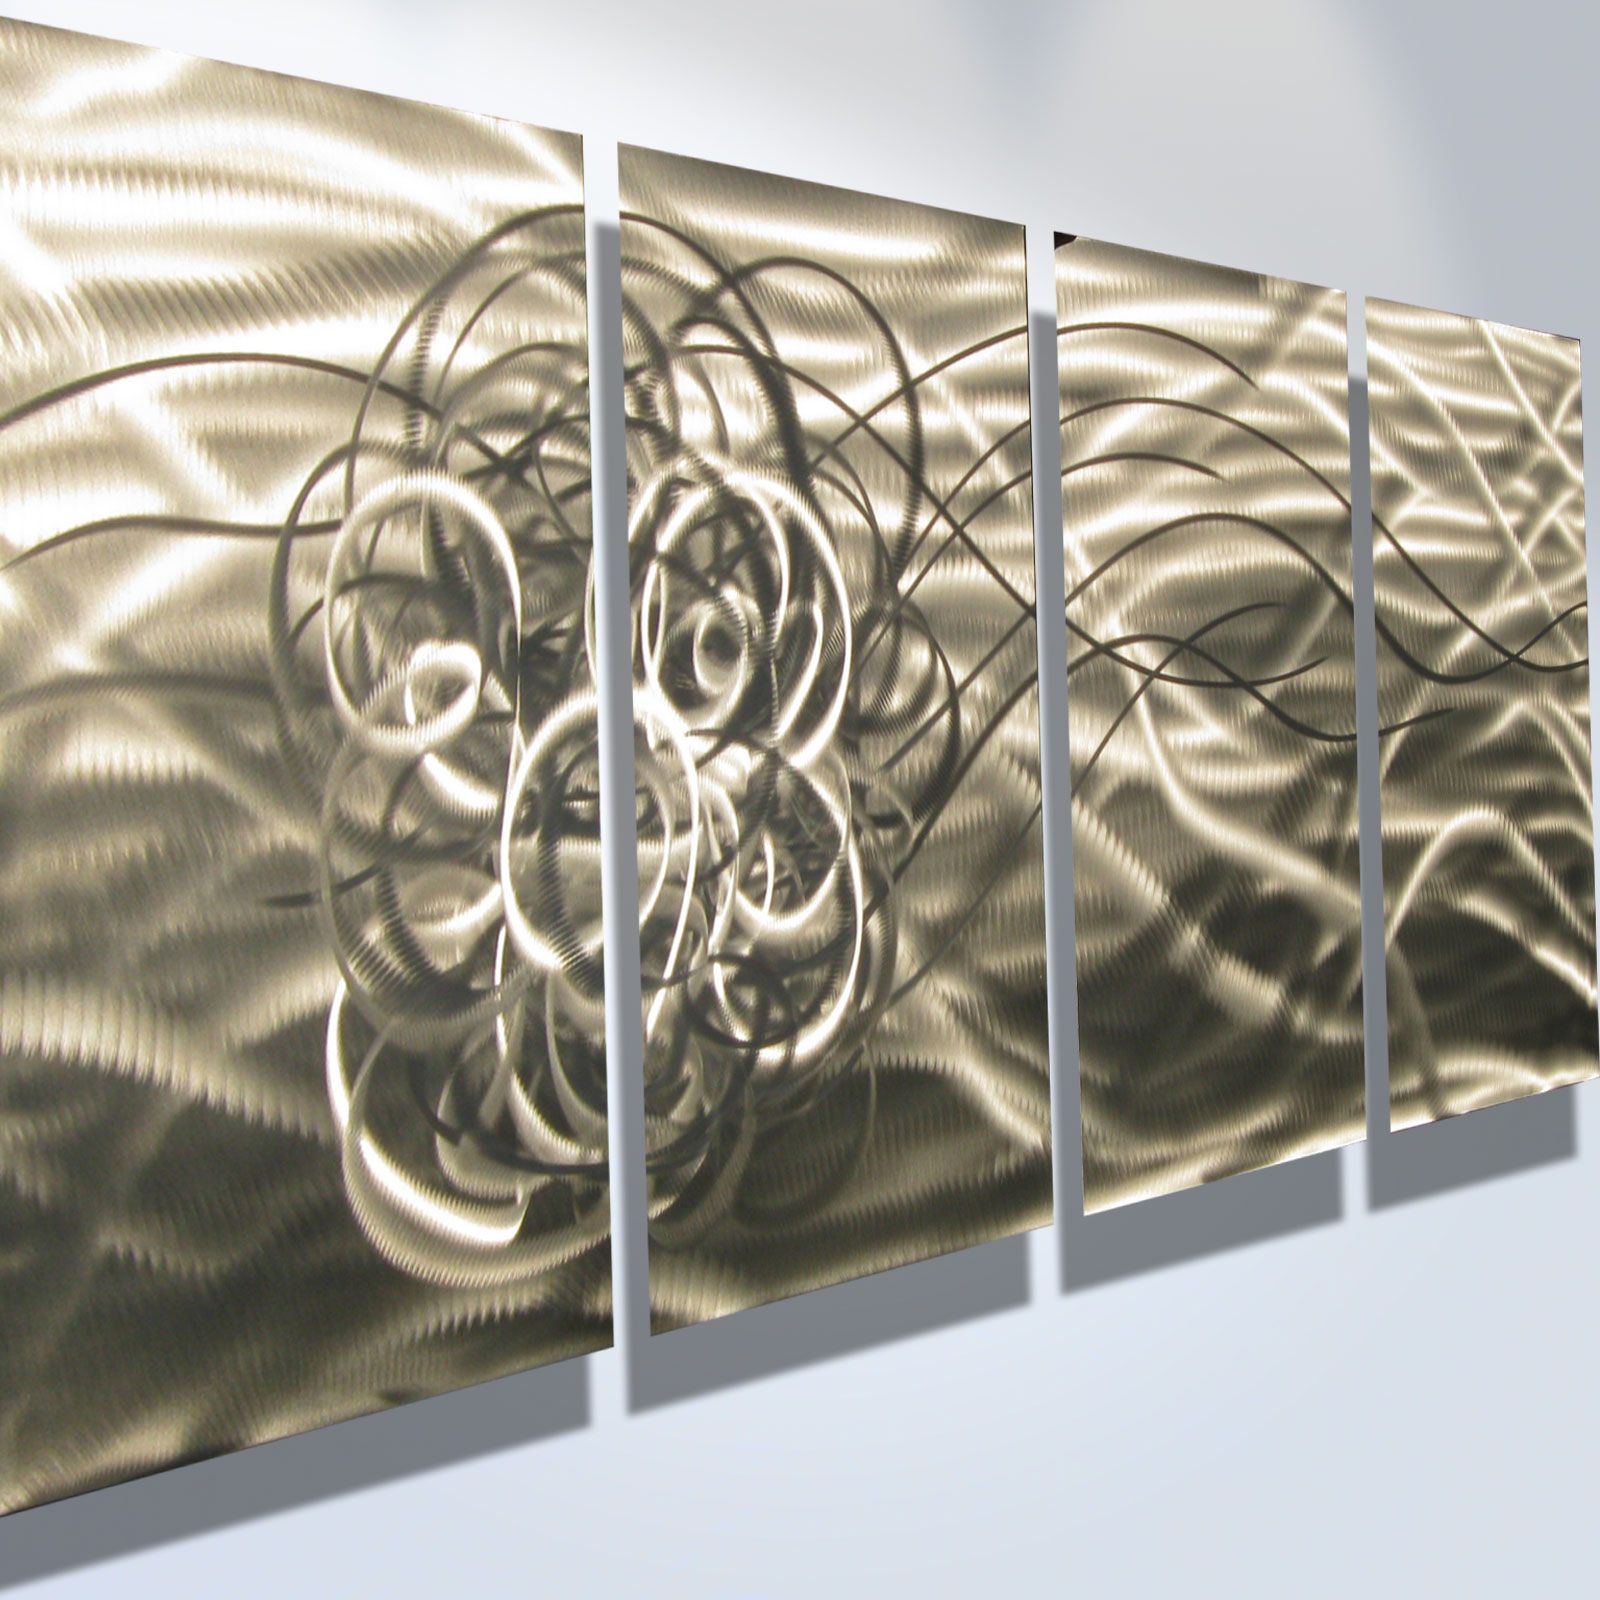 Torrent  Abstract Metal Wall Art Contemporary Modern Decor On Storenvy With Sparks Metal Wall Art (View 11 of 15)